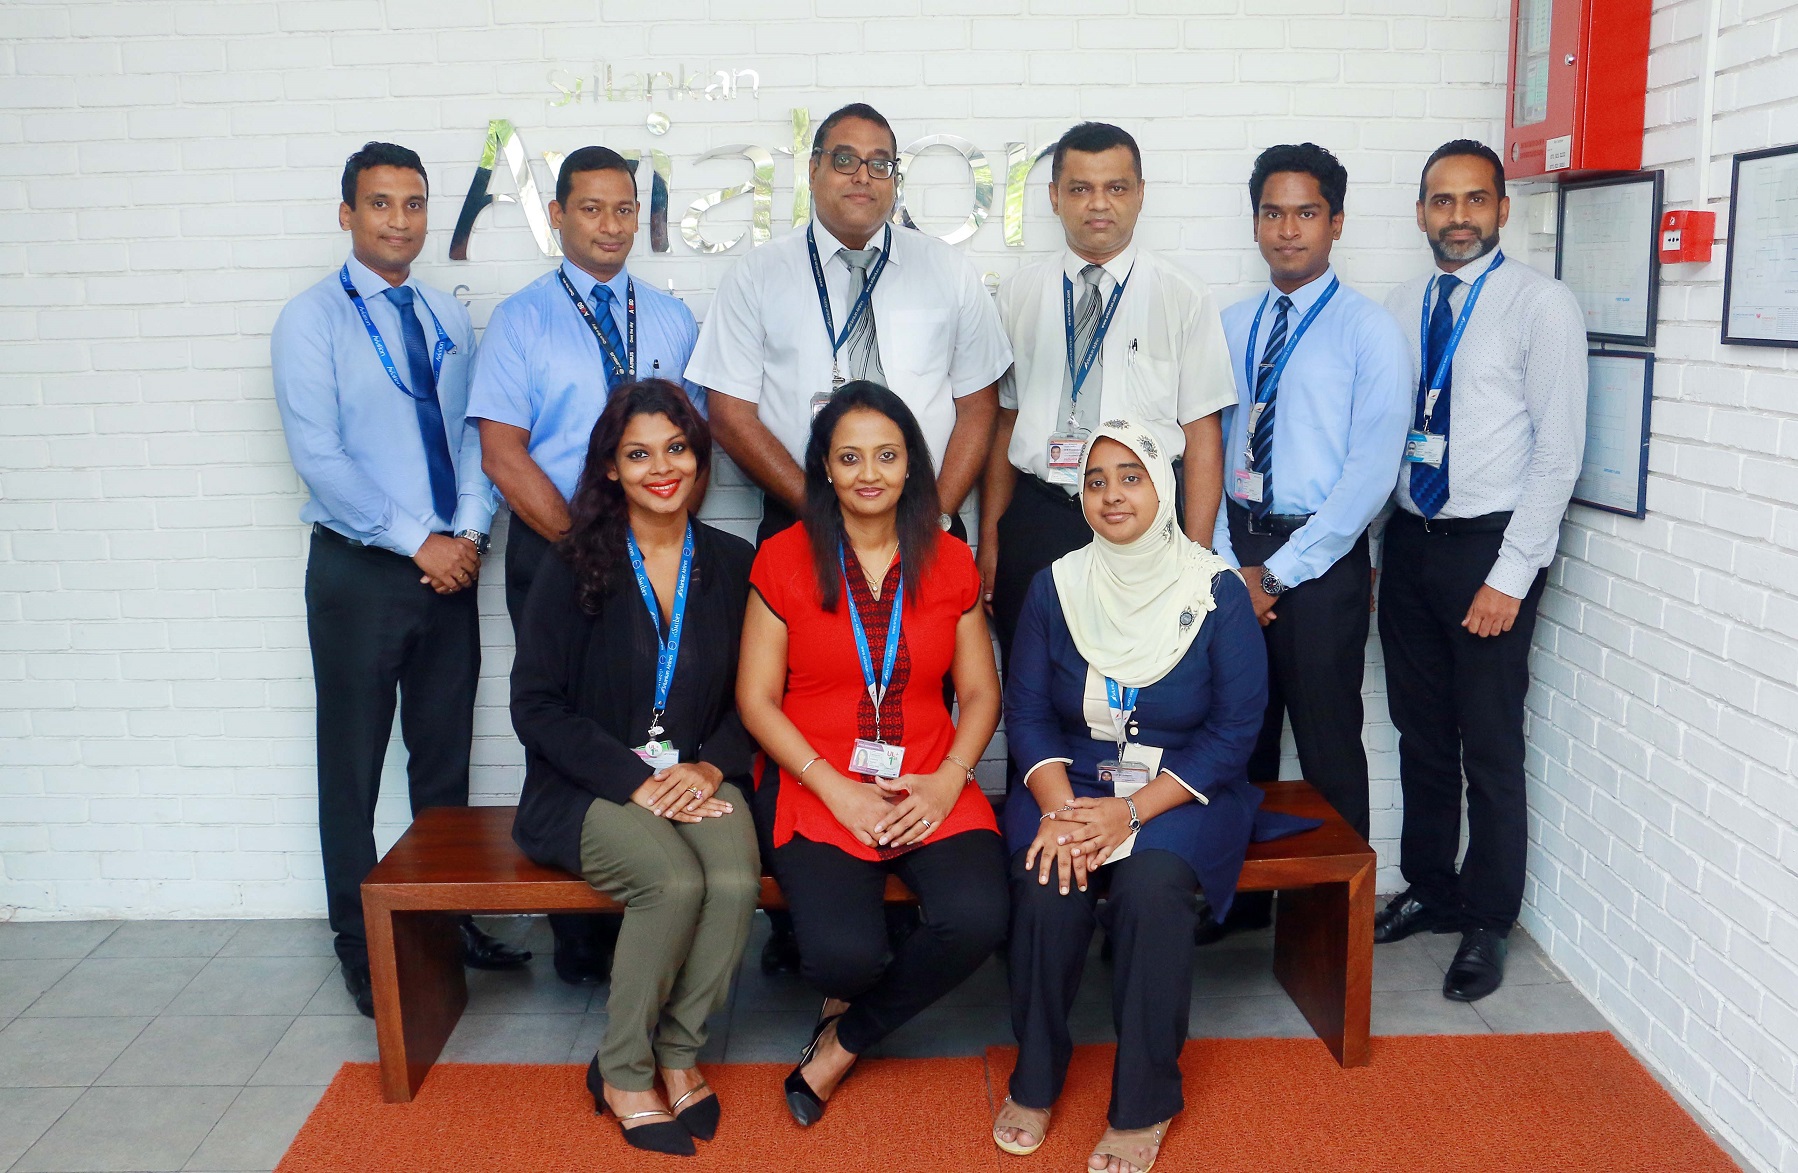 The Facilitator team from SriLankan Airlines